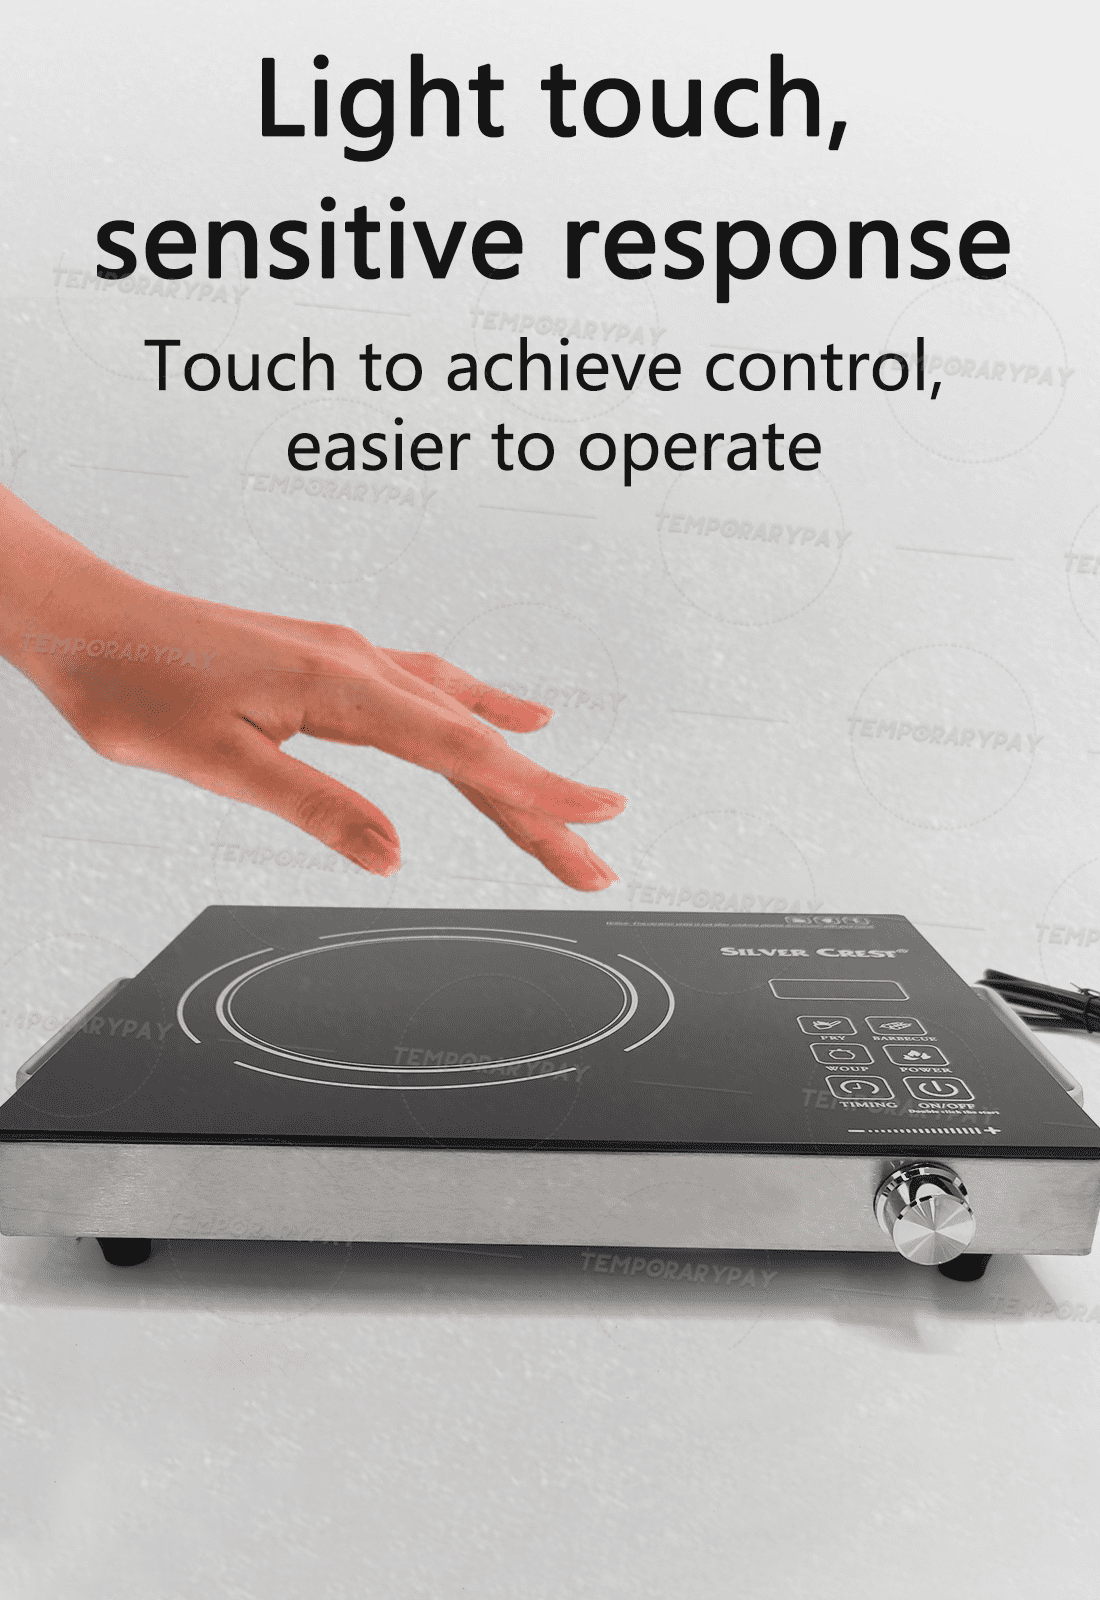 Wobythan Portable Induction Cooktop, 3500W Hot Pot Countertop Burner,  Electric Stove Range Cooktop Touch Sensor Control with Rotary Switch 